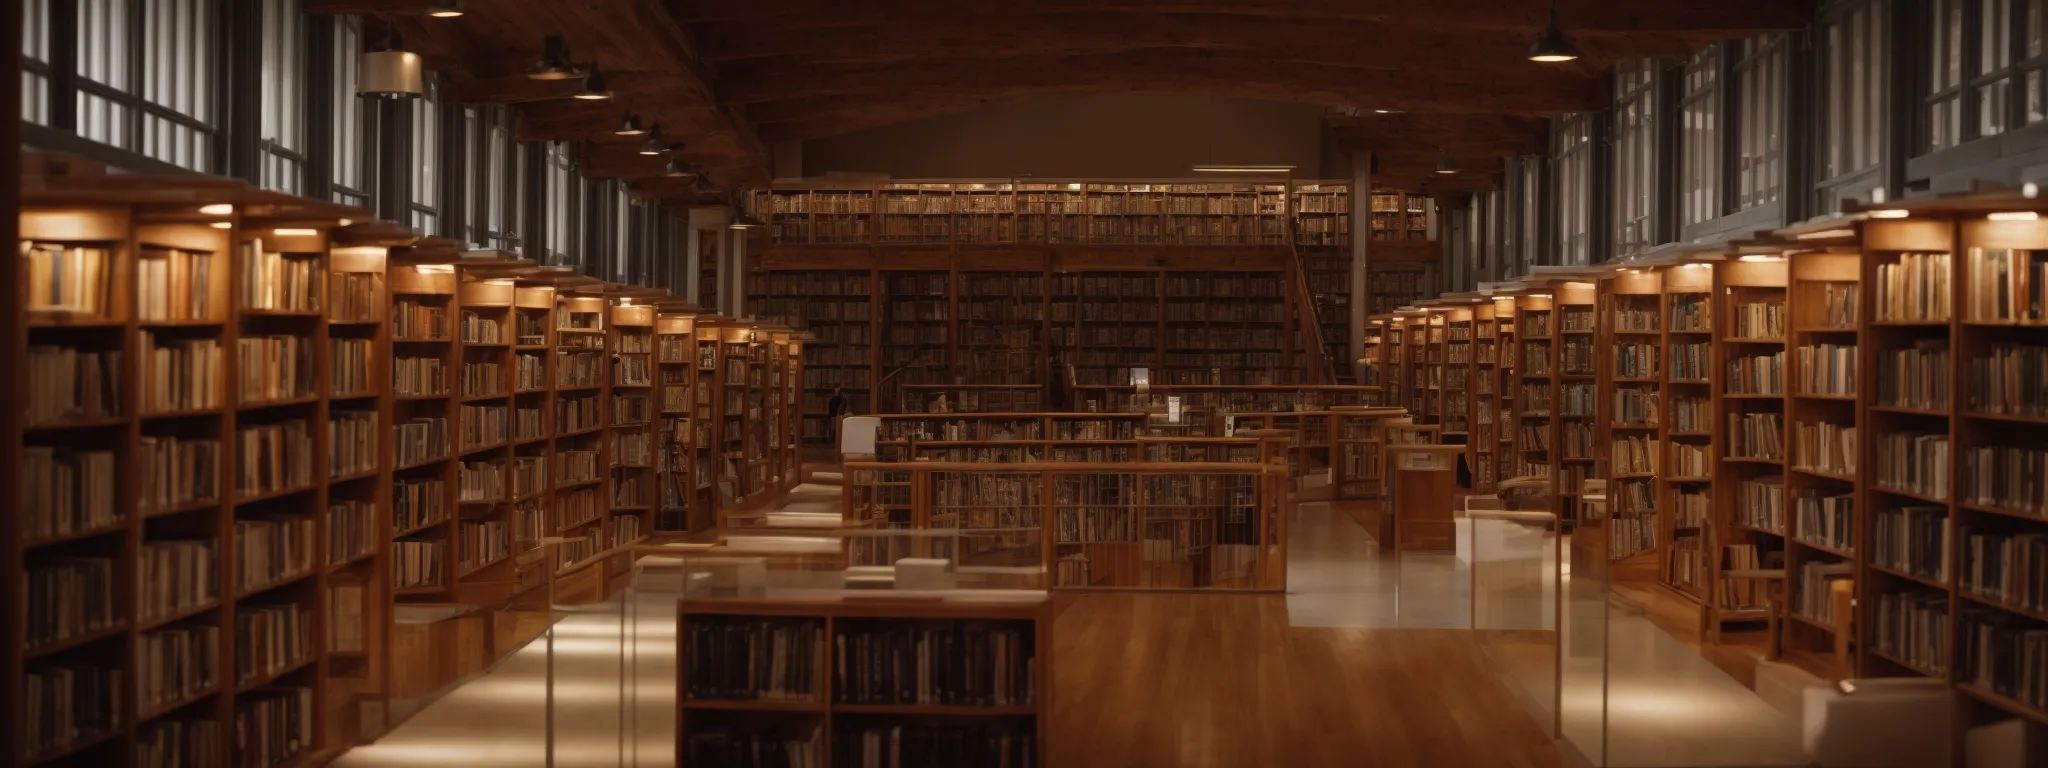 a serene library with rows of bookshelves creating pathways for an academic quest.